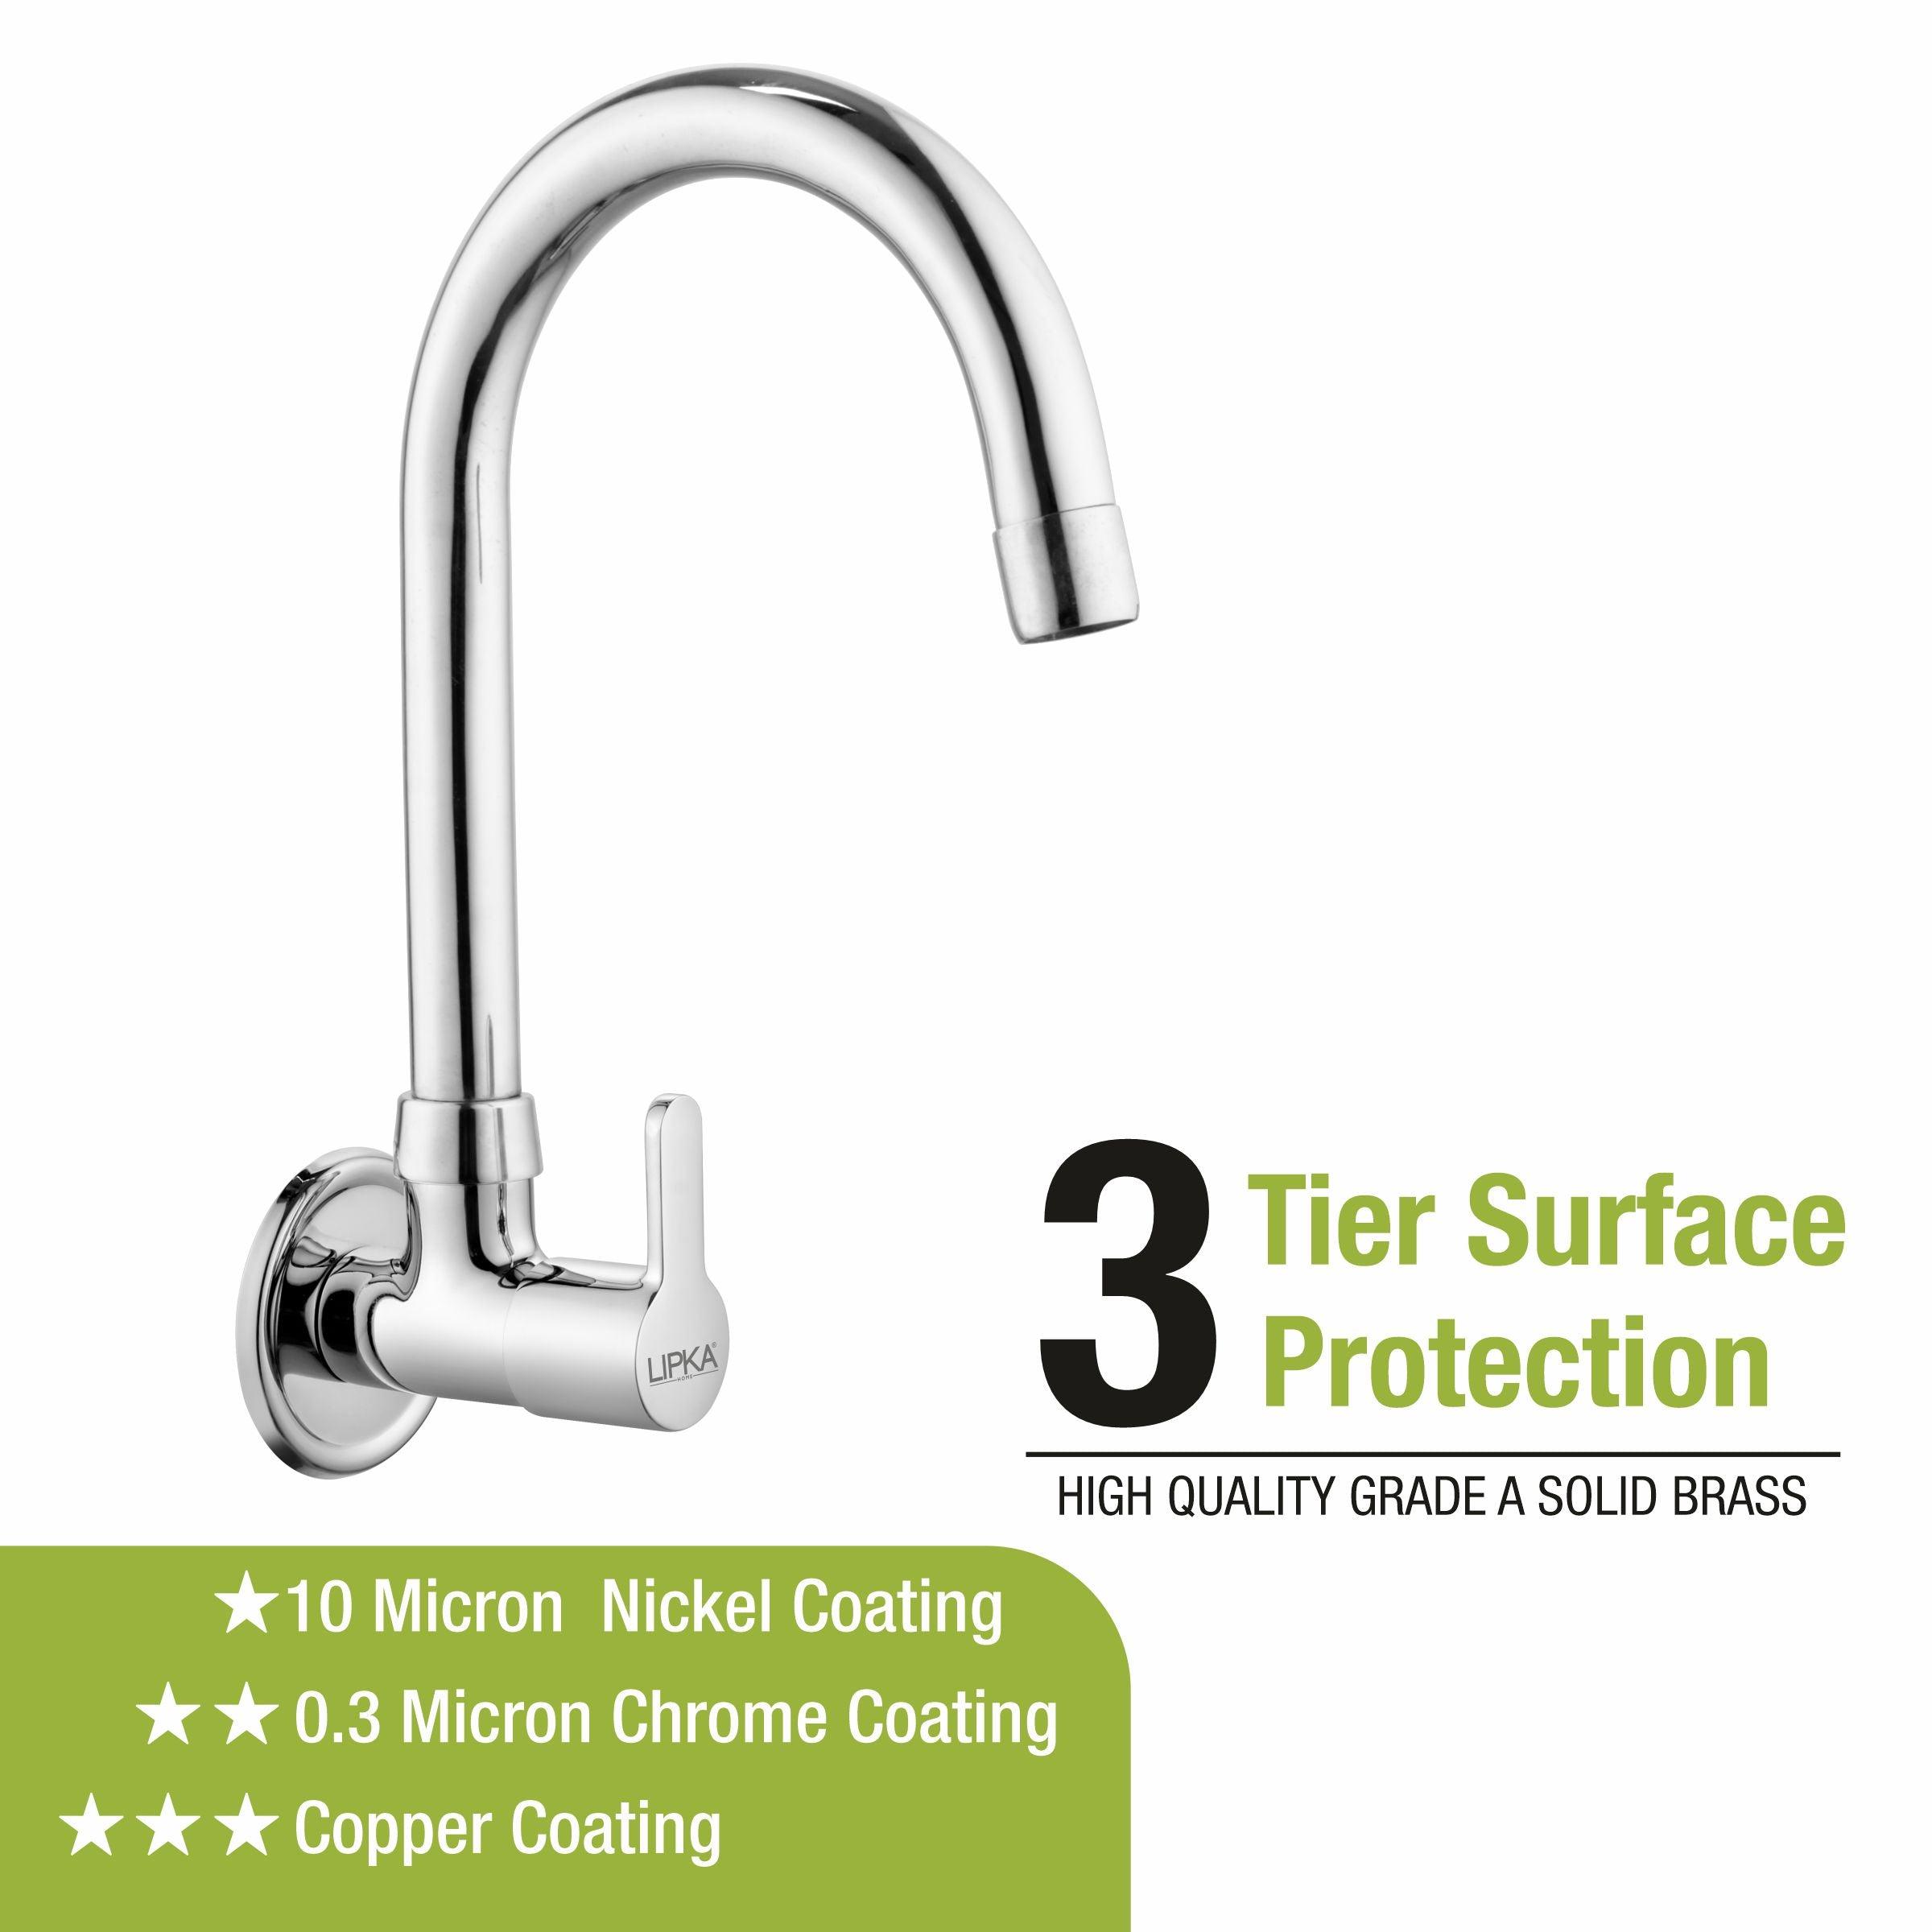 Fusion Sink Tap Brass Faucet with Round Swivel Spout (15 Inches) - LIPKA - Lipka Home